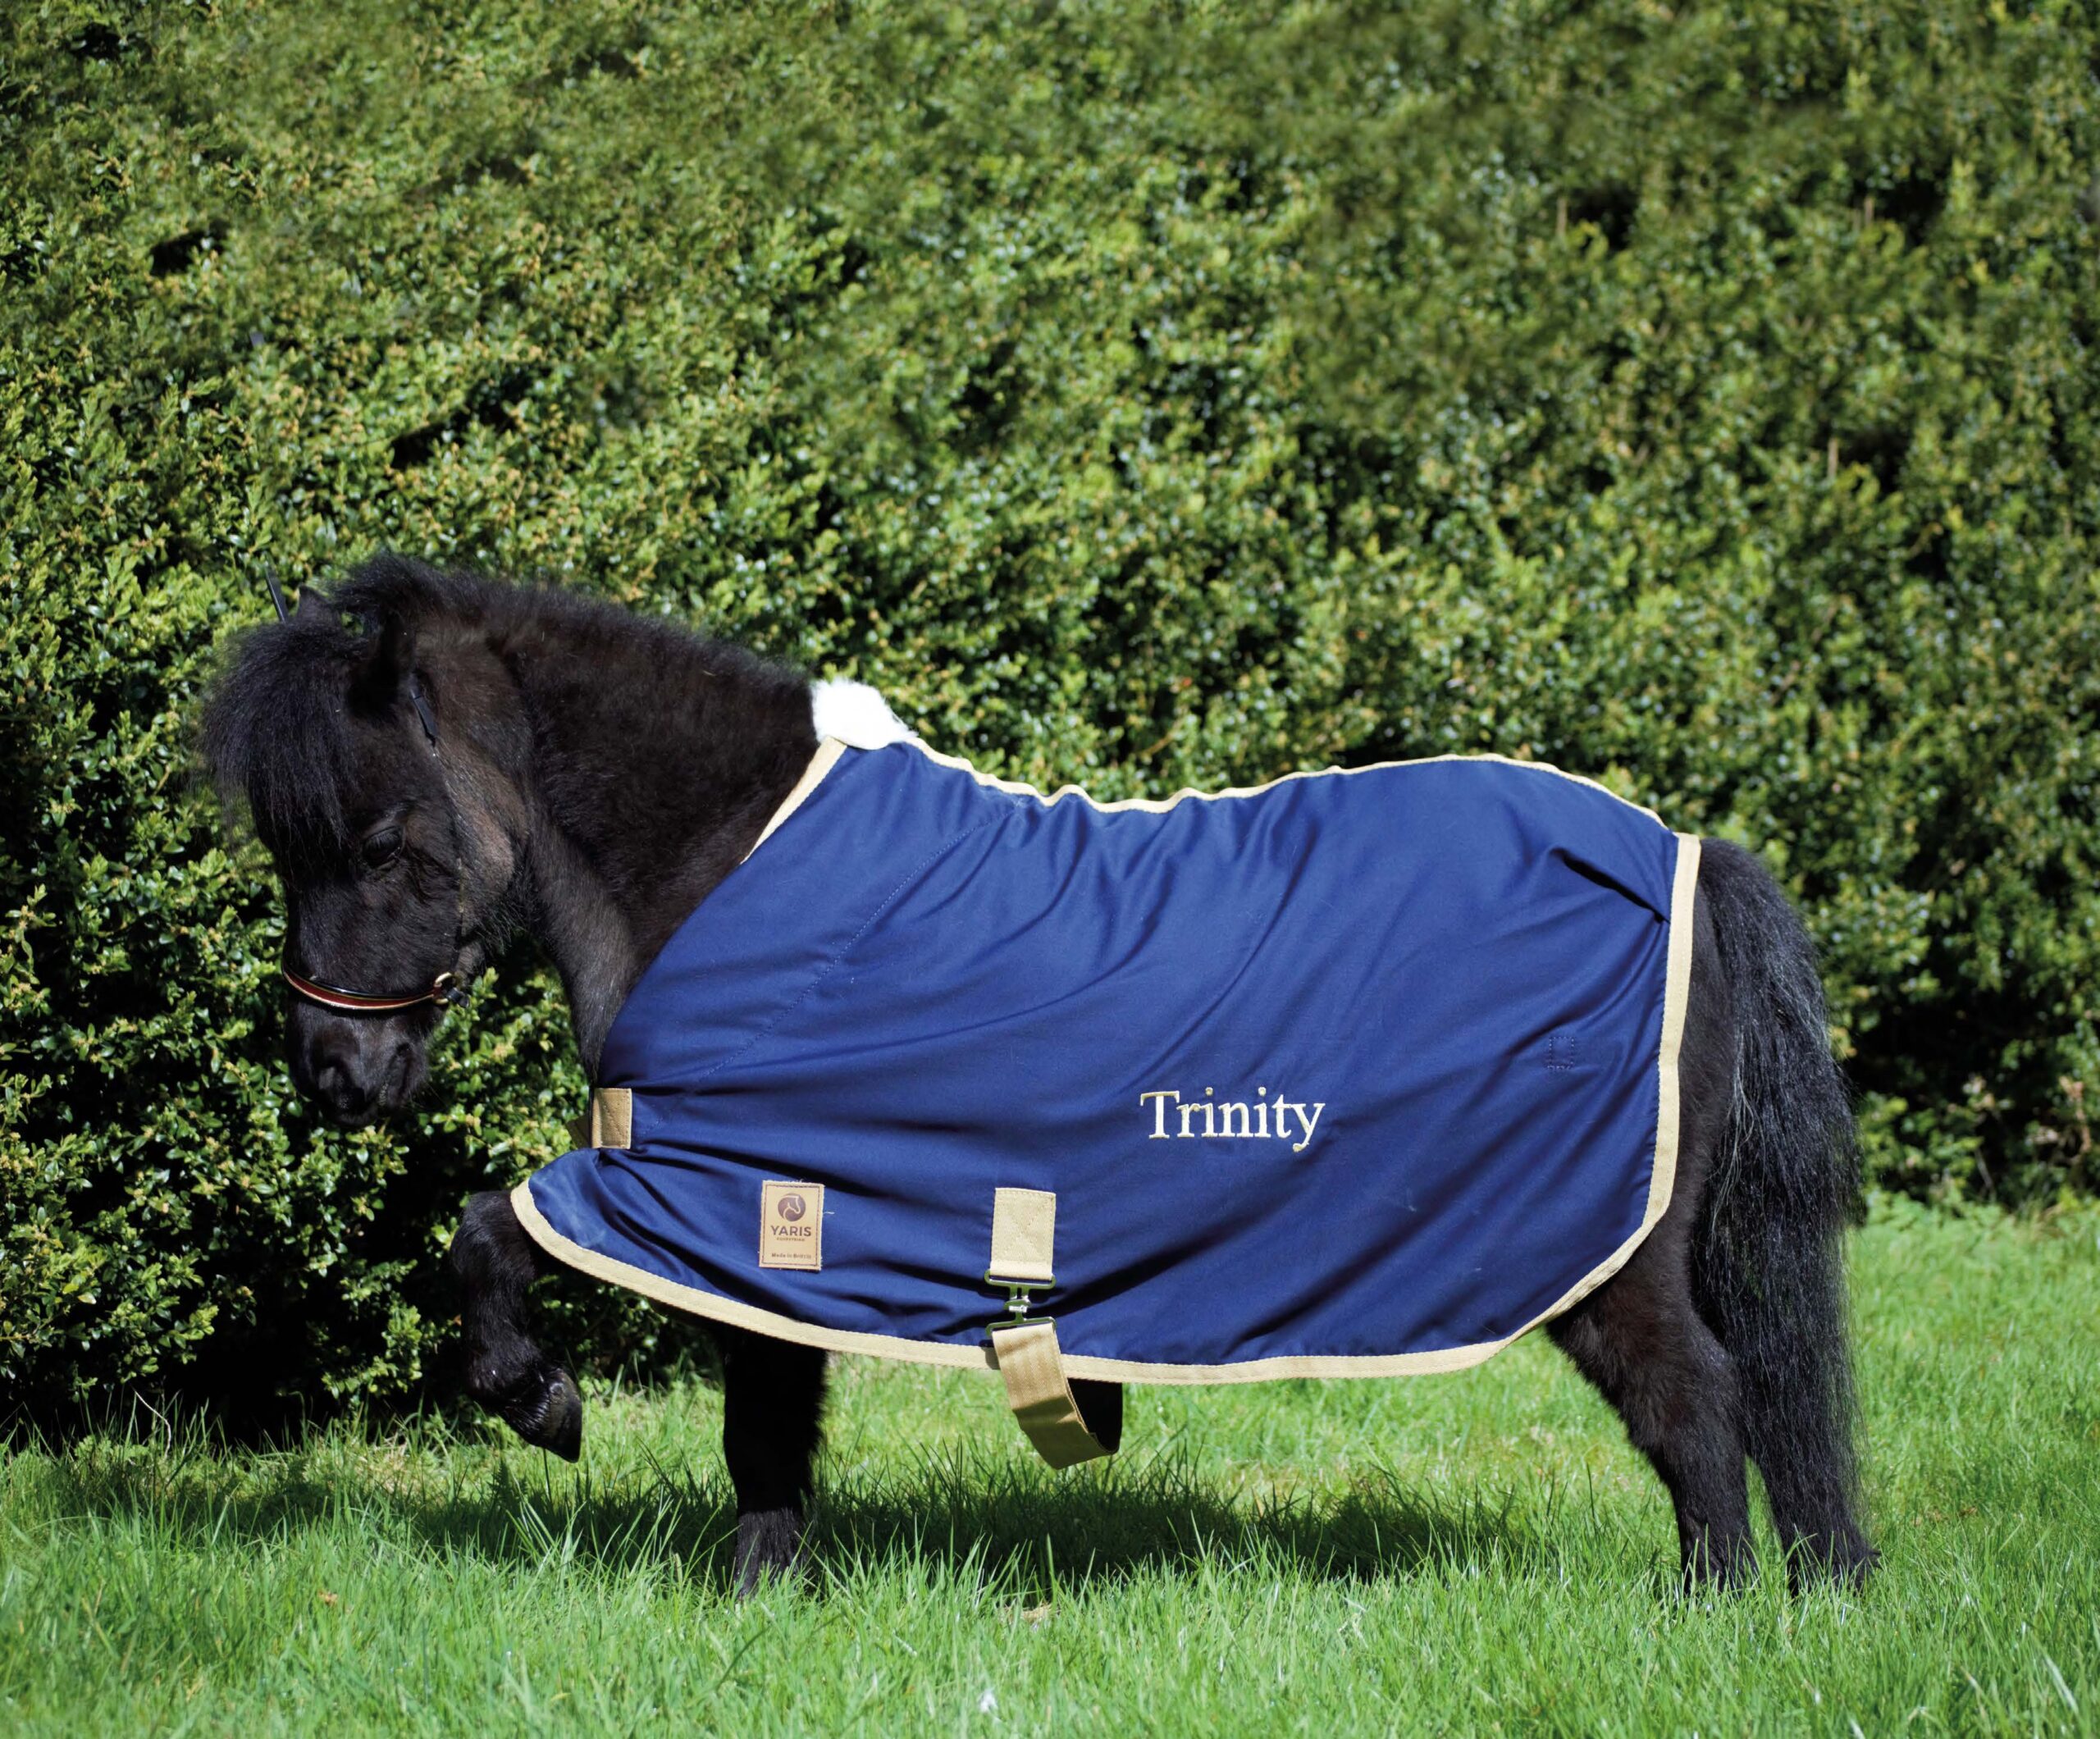 A black pony wearing a blue coat that reads 'Trinity'